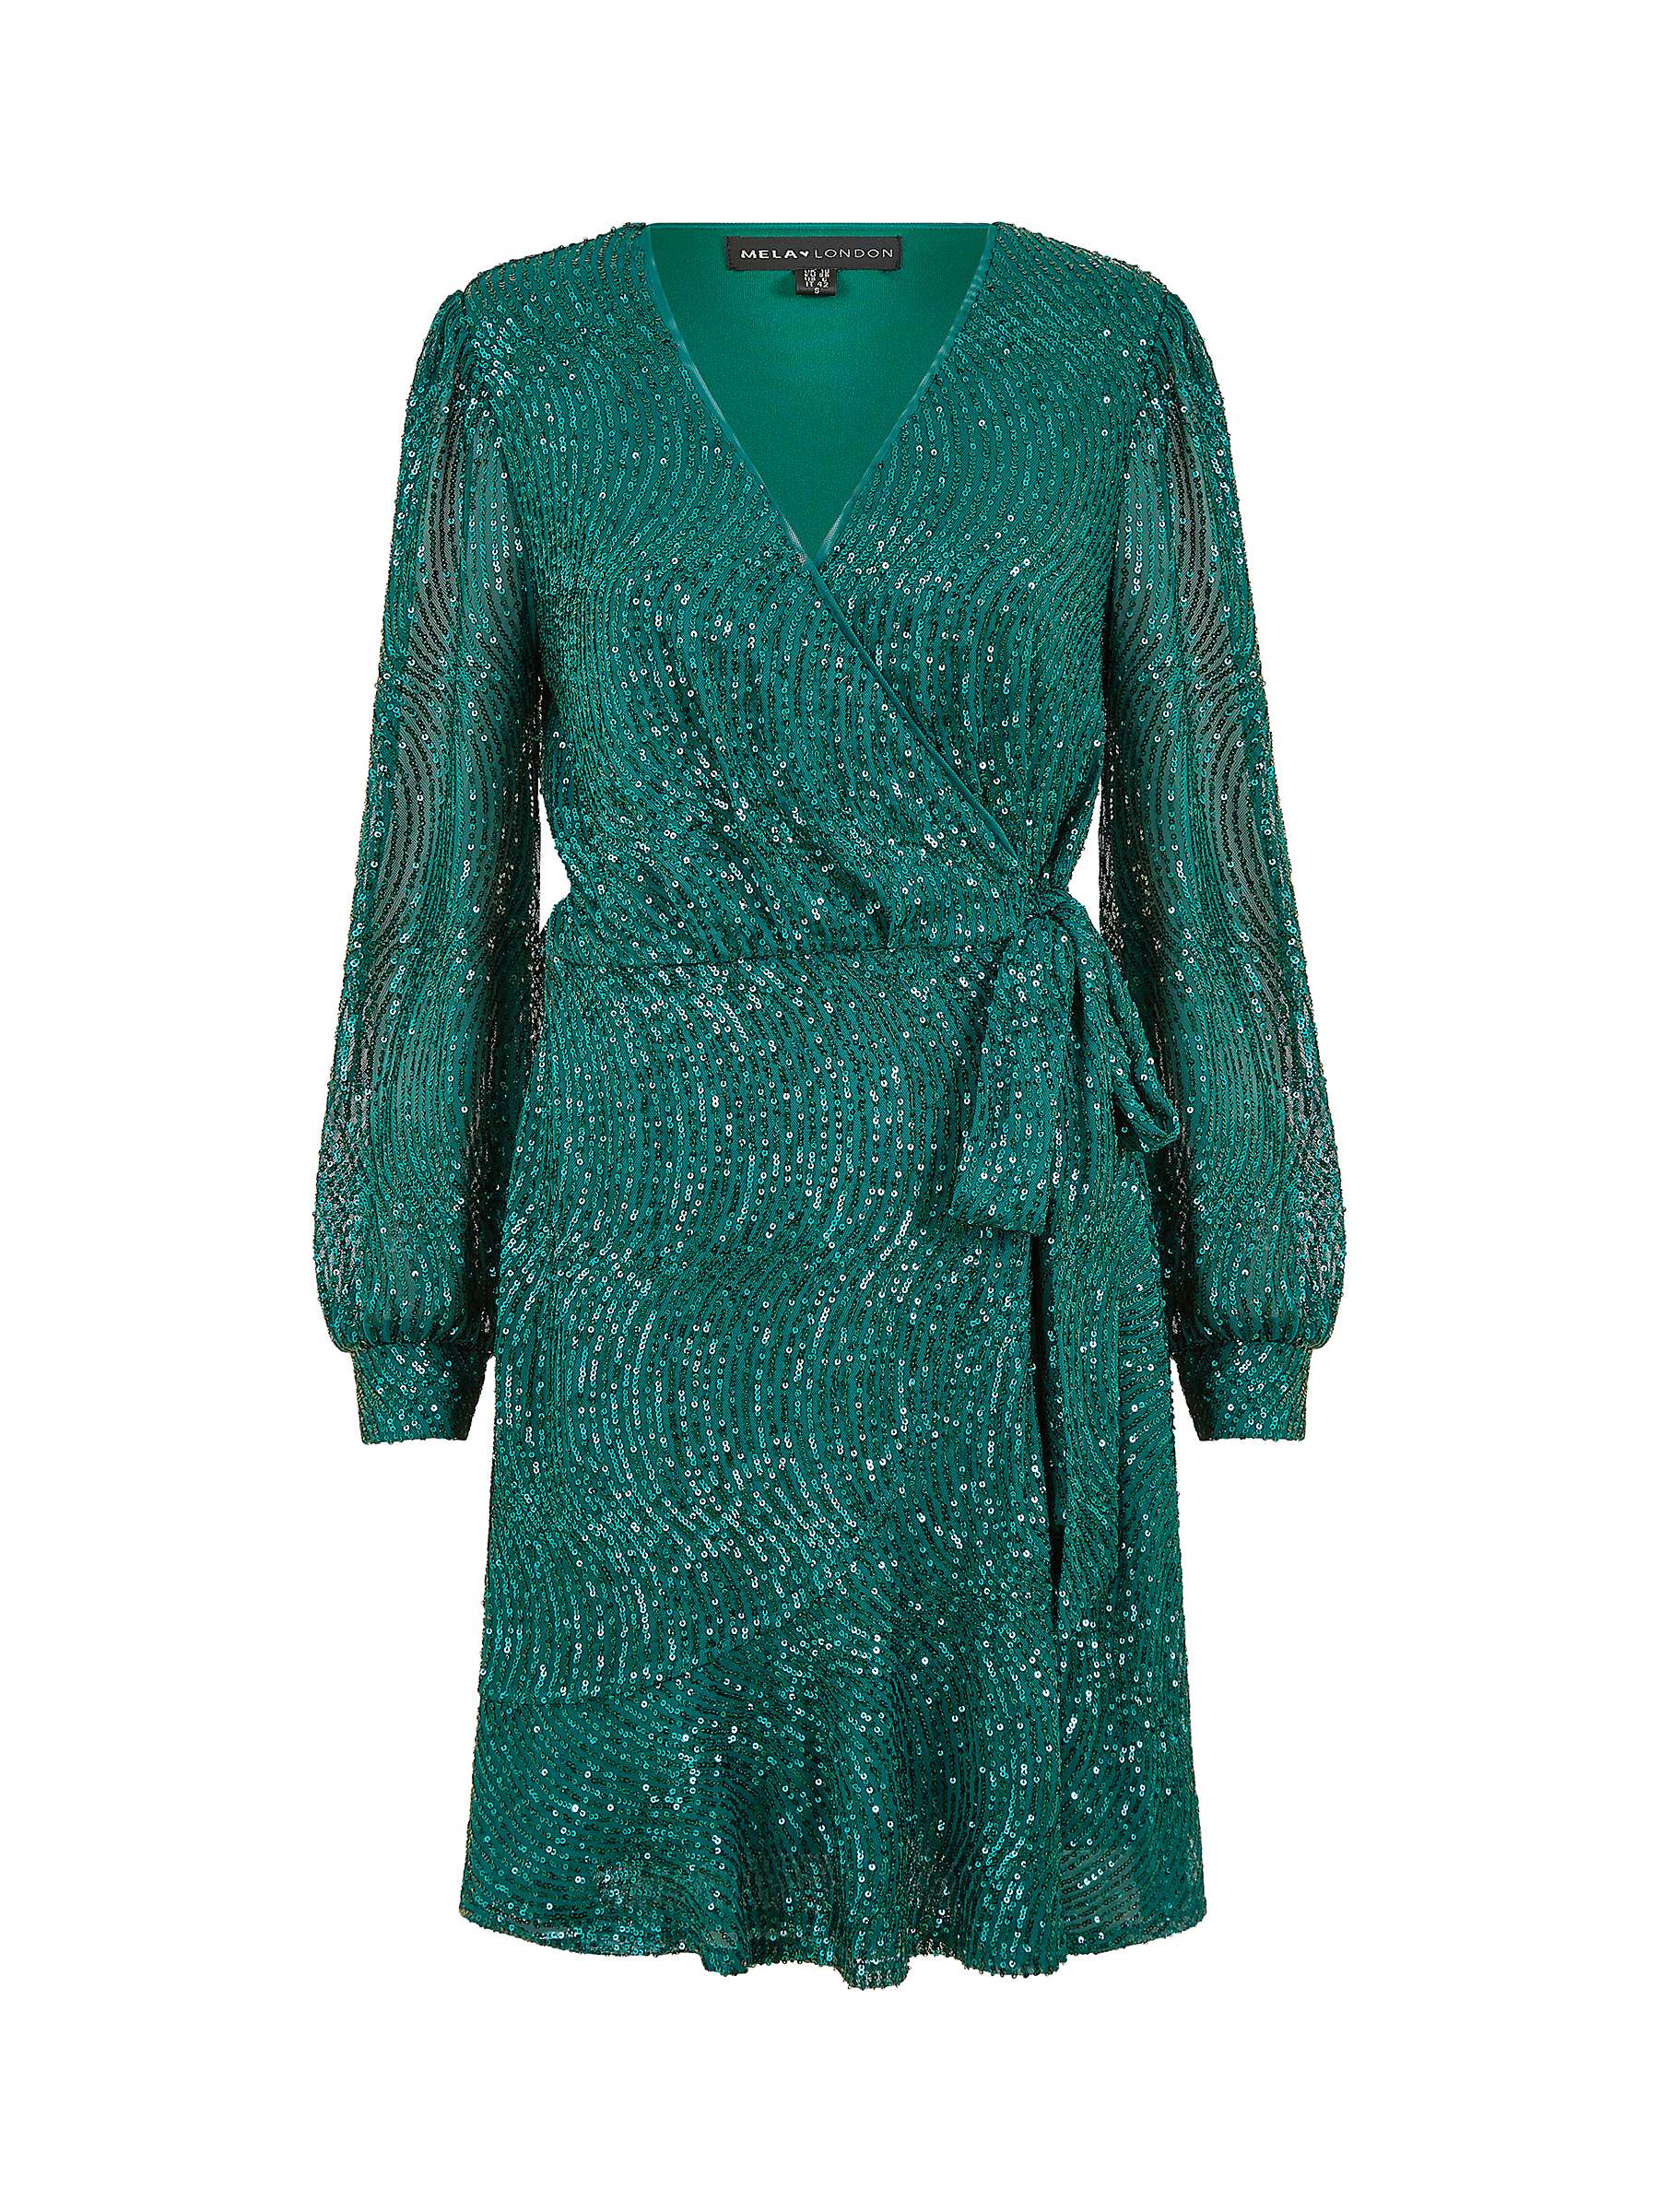 Buy Yumi Sequin Frill Wrap Dress Online at johnlewis.com